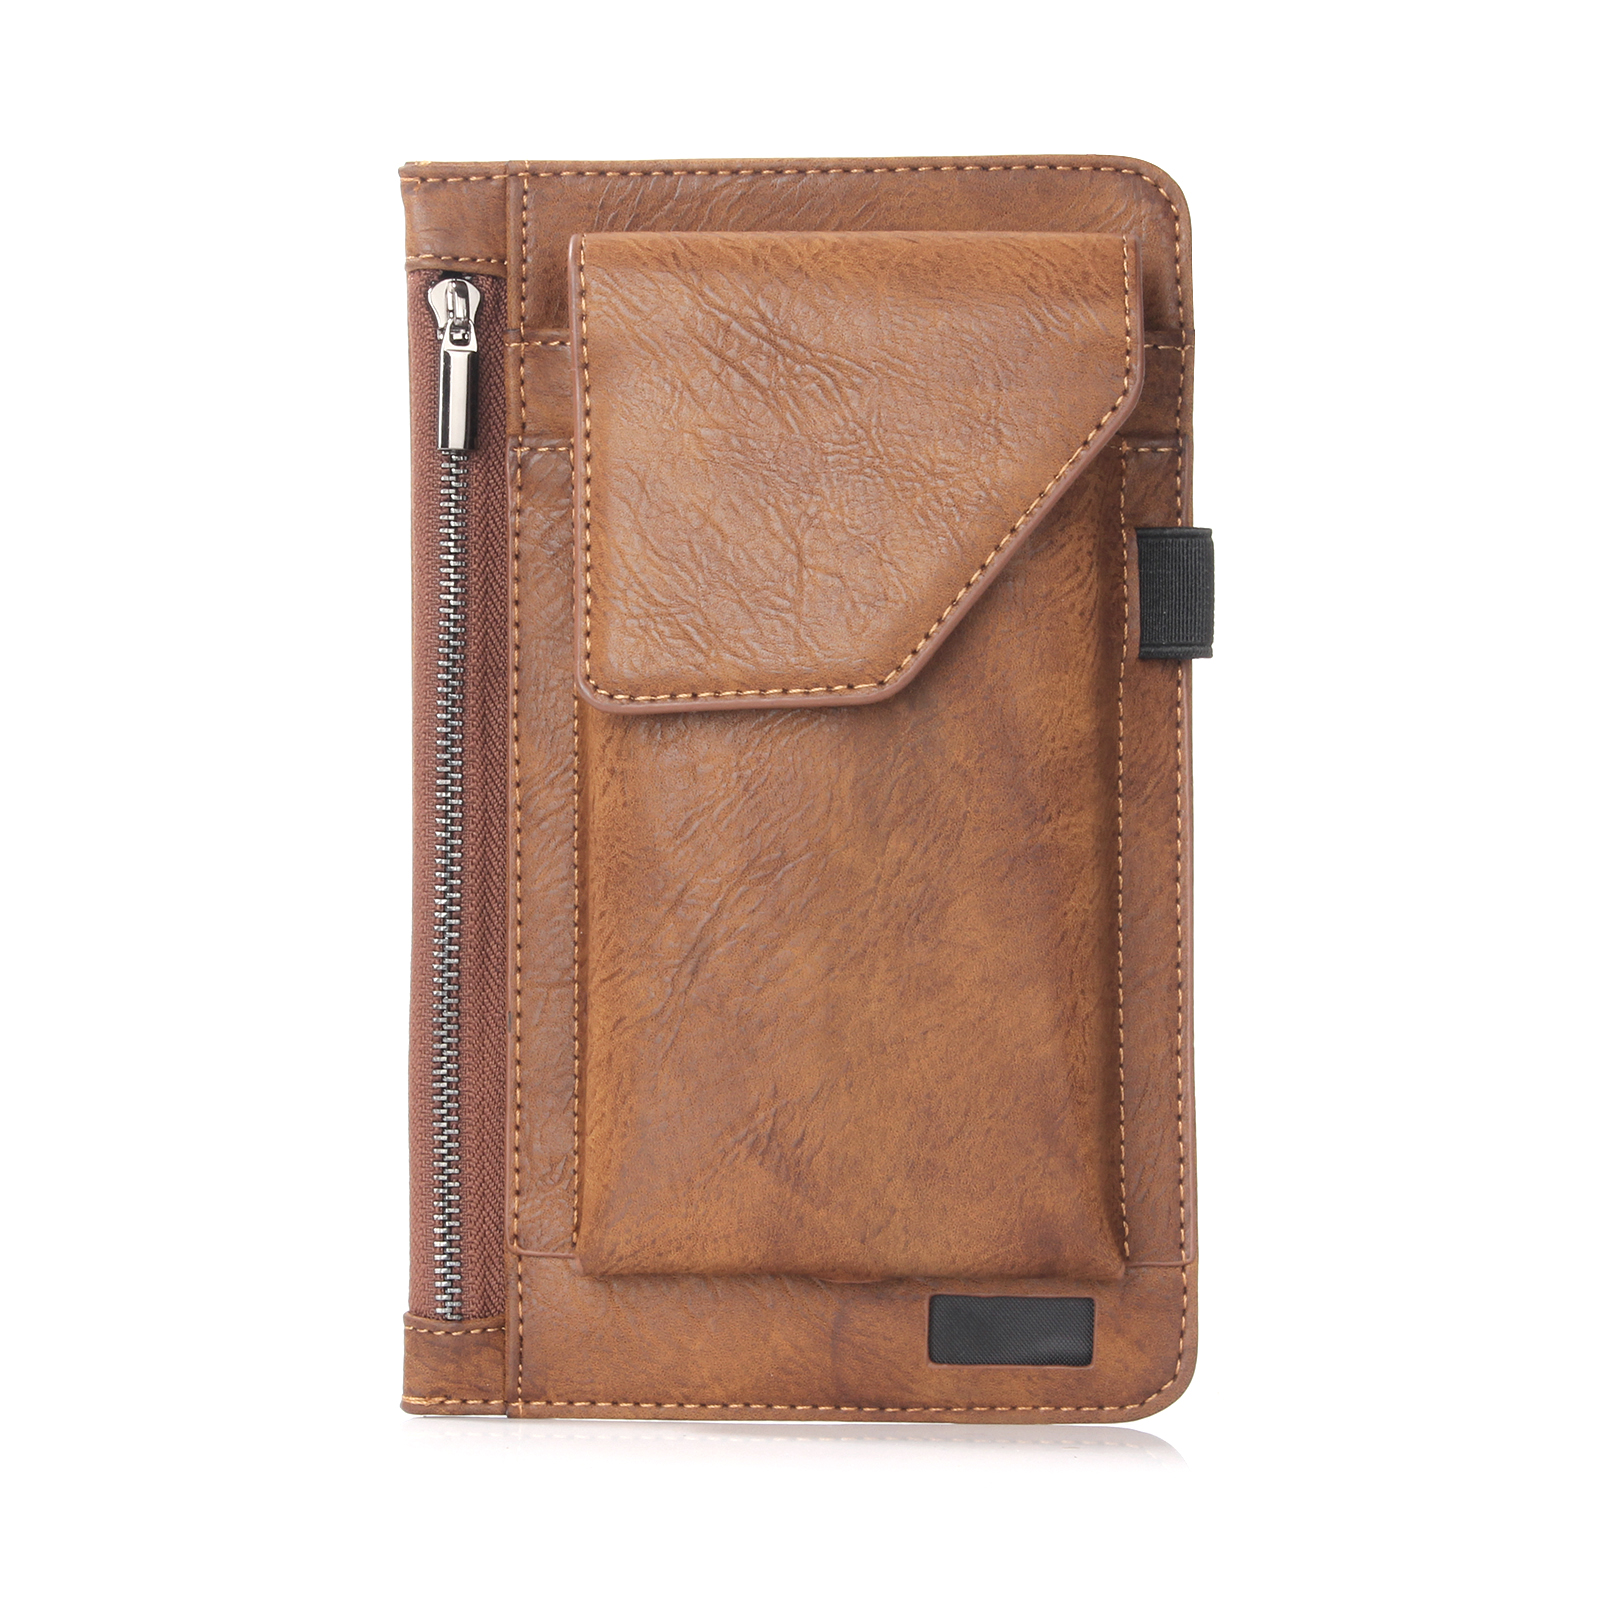 Bakeey-Casual-Vintage-Bussiness-Multi-Pocket-Reserve-Charging-Port-PU-Leather-Mobile-Phone-Money-Hik-1692248-2